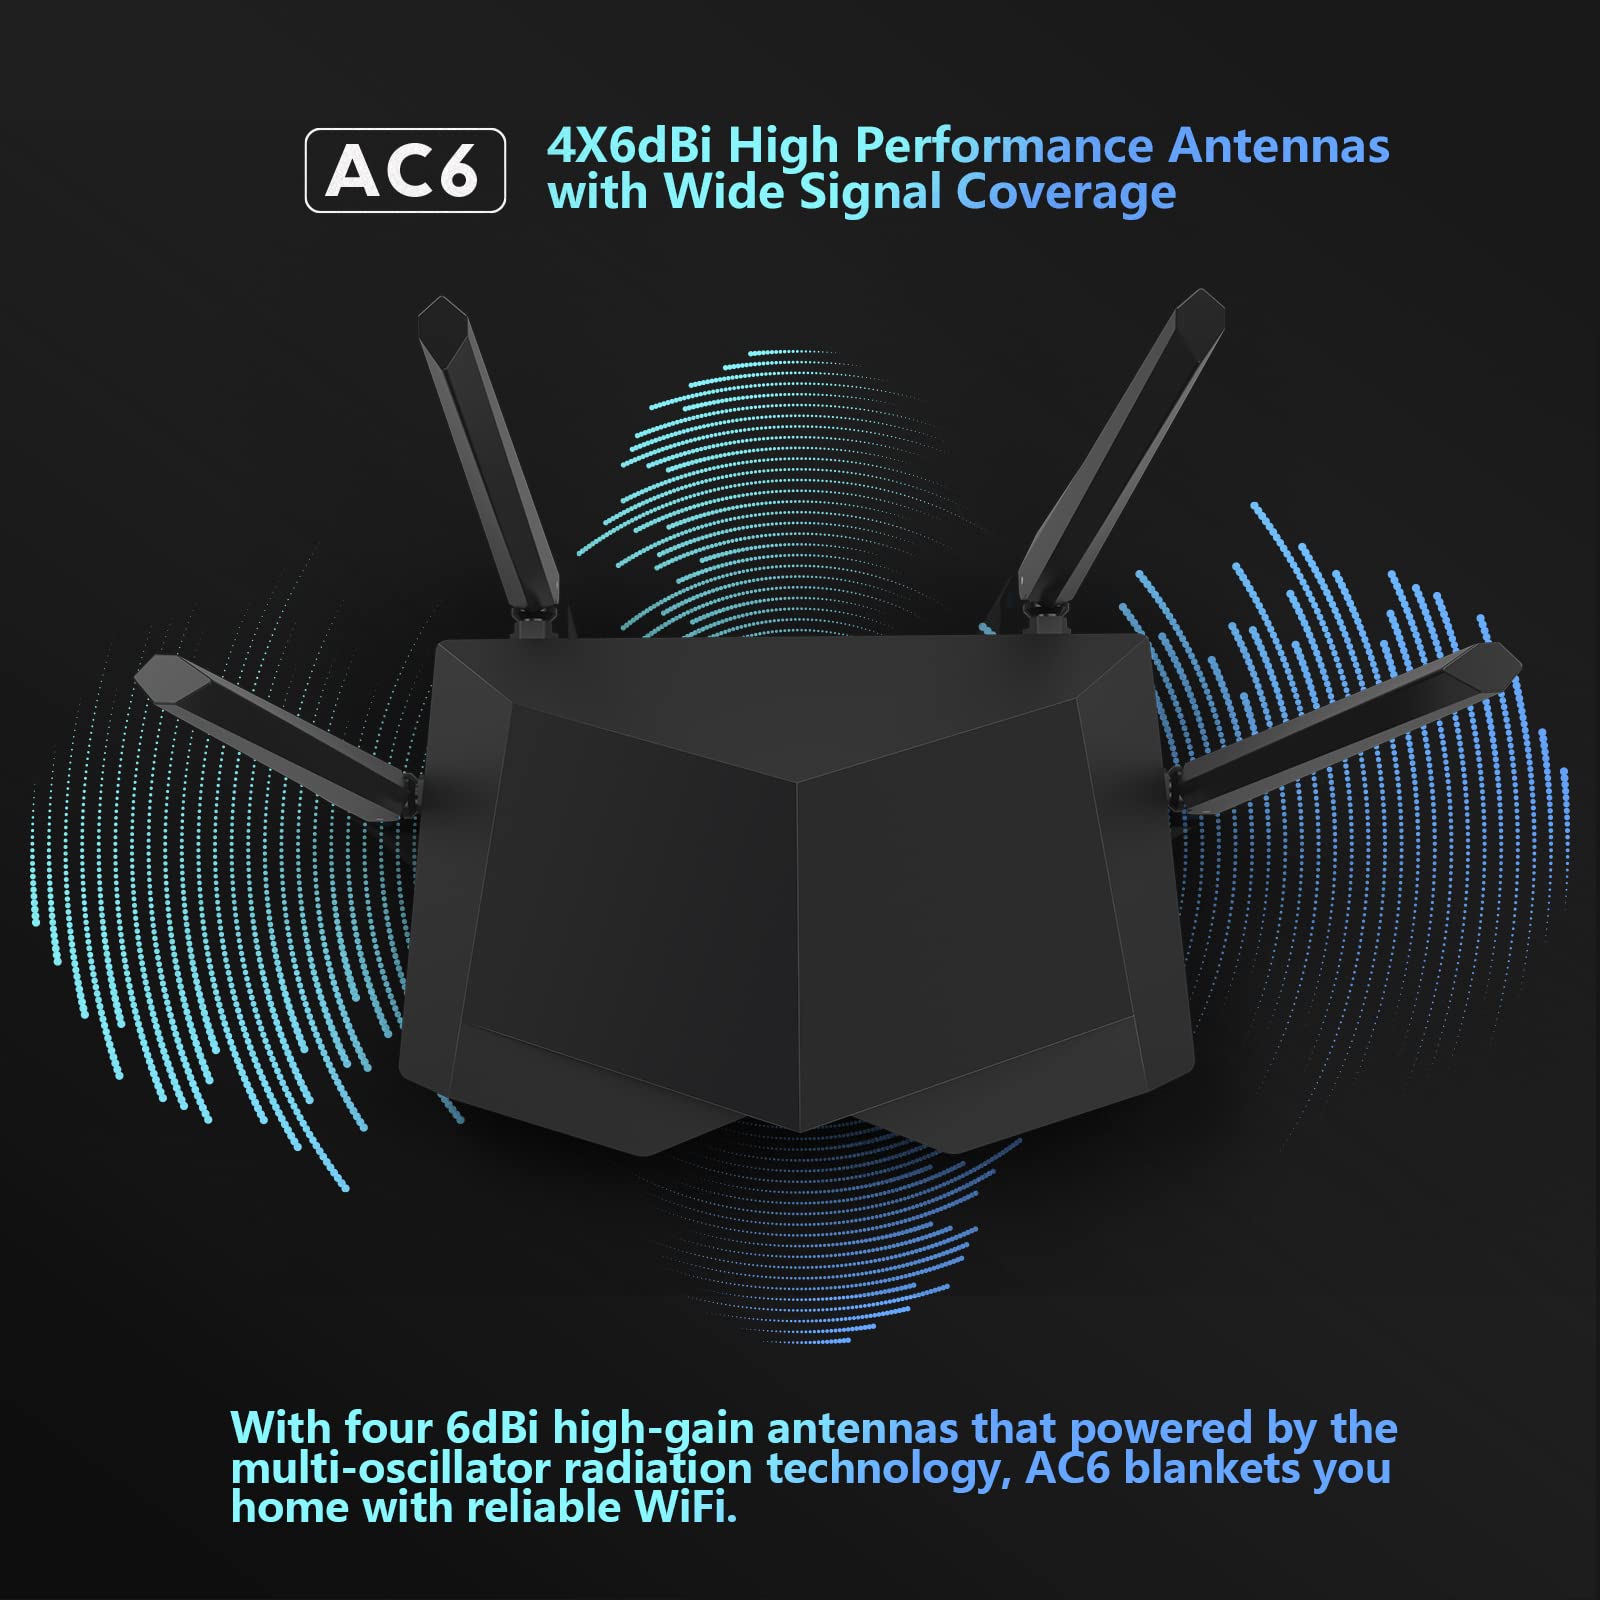 Tenda AC1200 Smart WiFi Router, High Speed Dual Band Wireless Internet Router with Smart APP, 4 x 100 Mbps Fast Ethernet Ports, Supports Guest WiFi, Access Point Mode, IPv6 and Parental Controls(AC6)